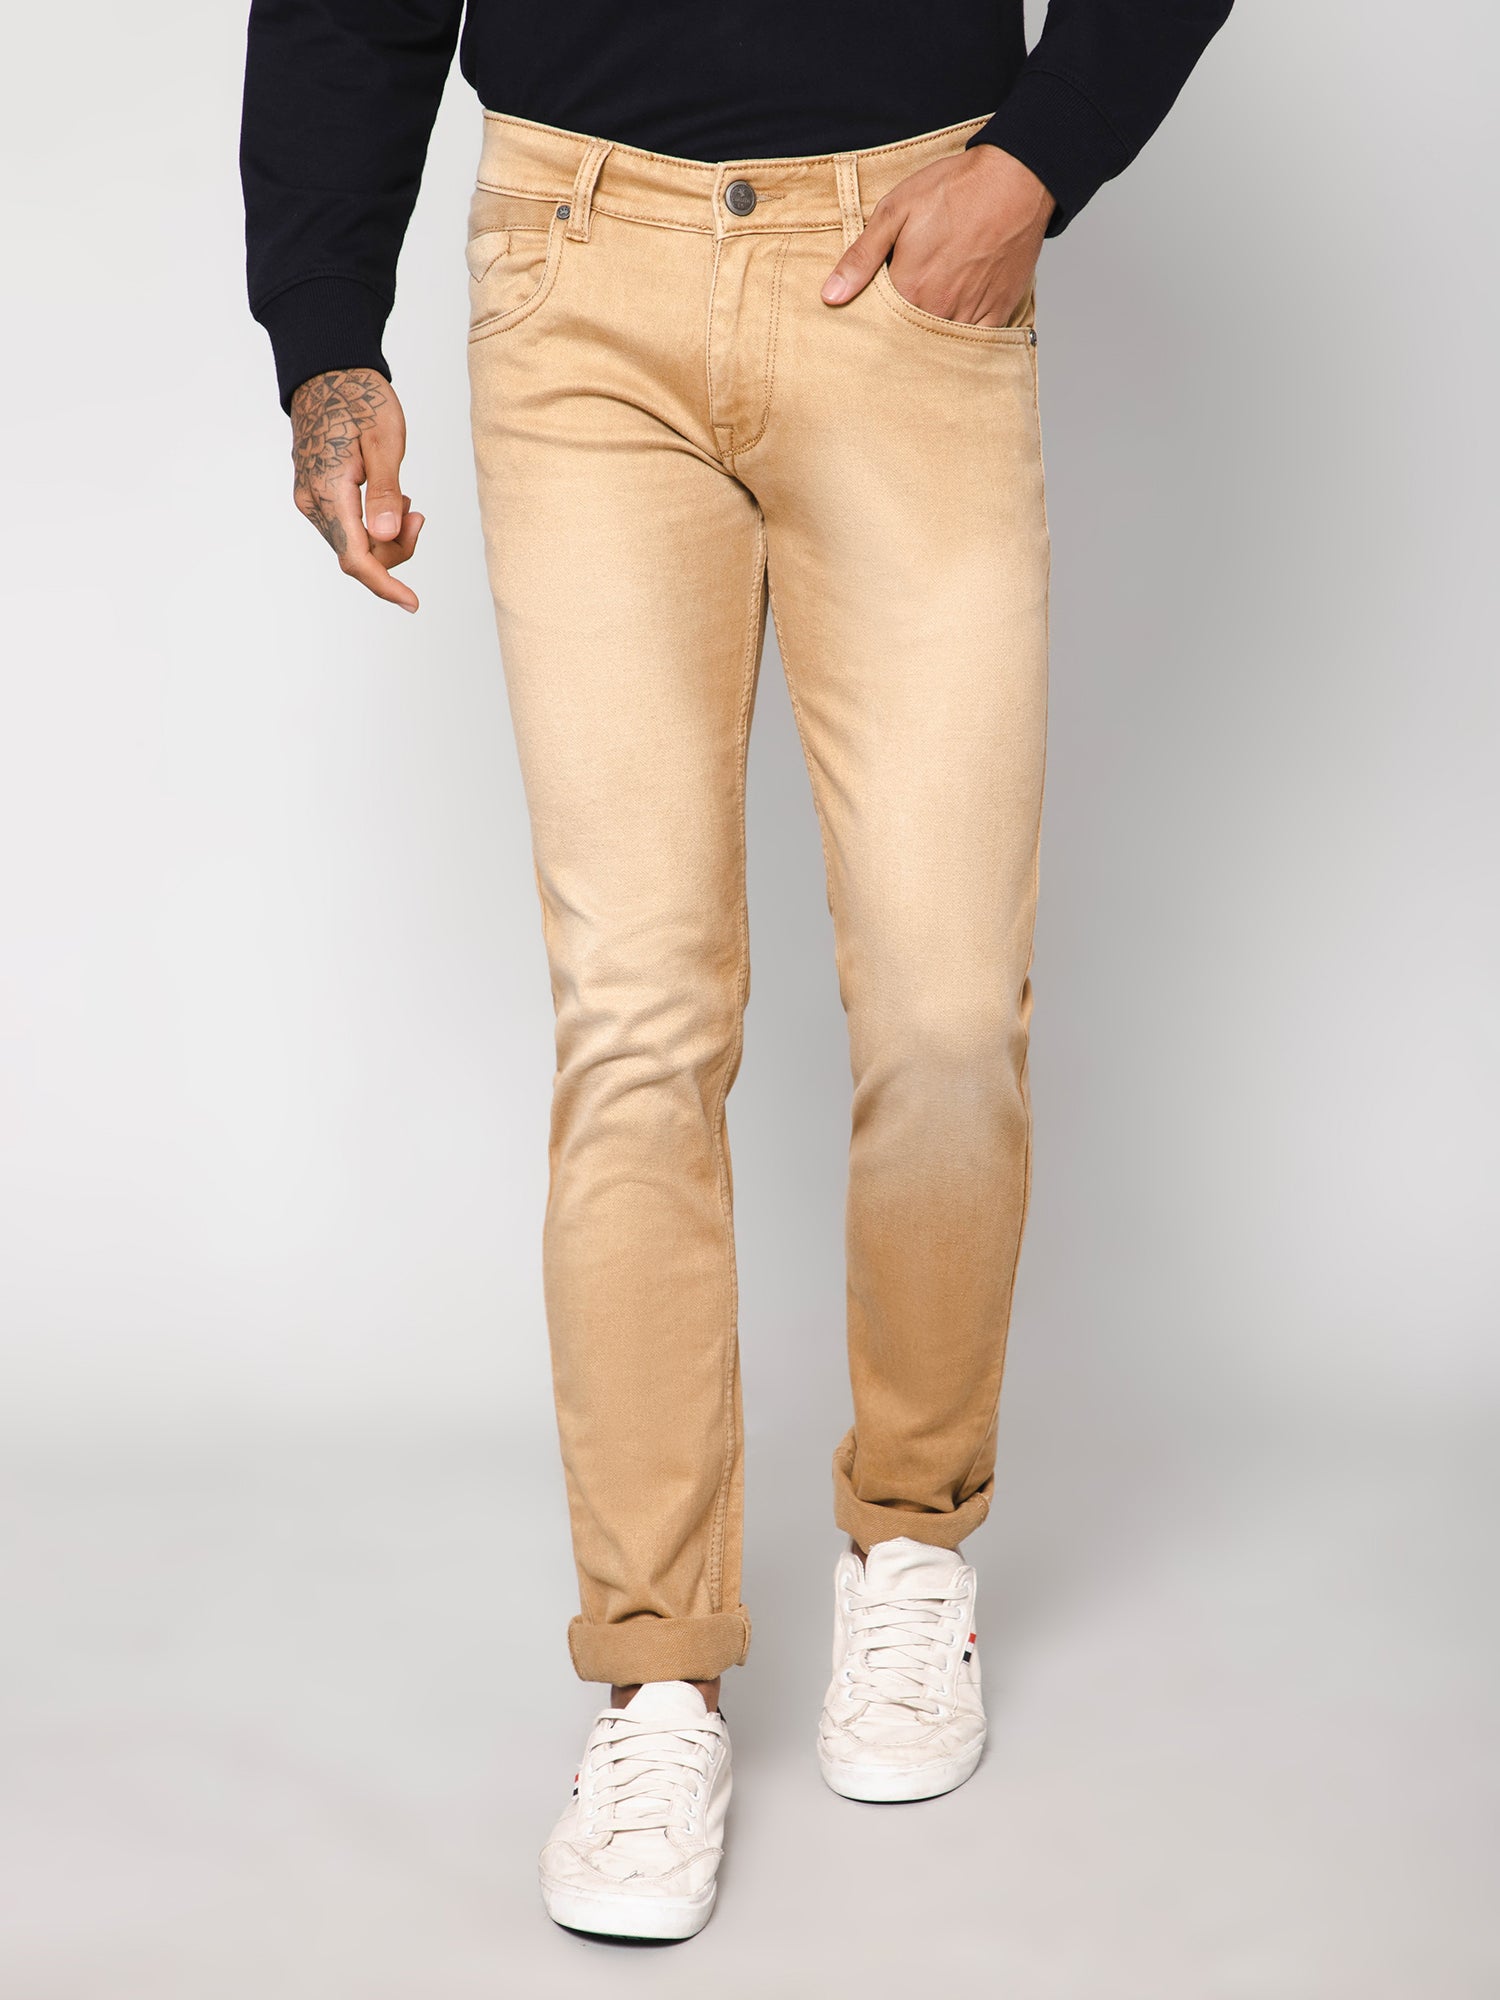 Buy Being Human Khaki Cotton Comfort Fit Jeans for Mens Online  Tata CLiQ